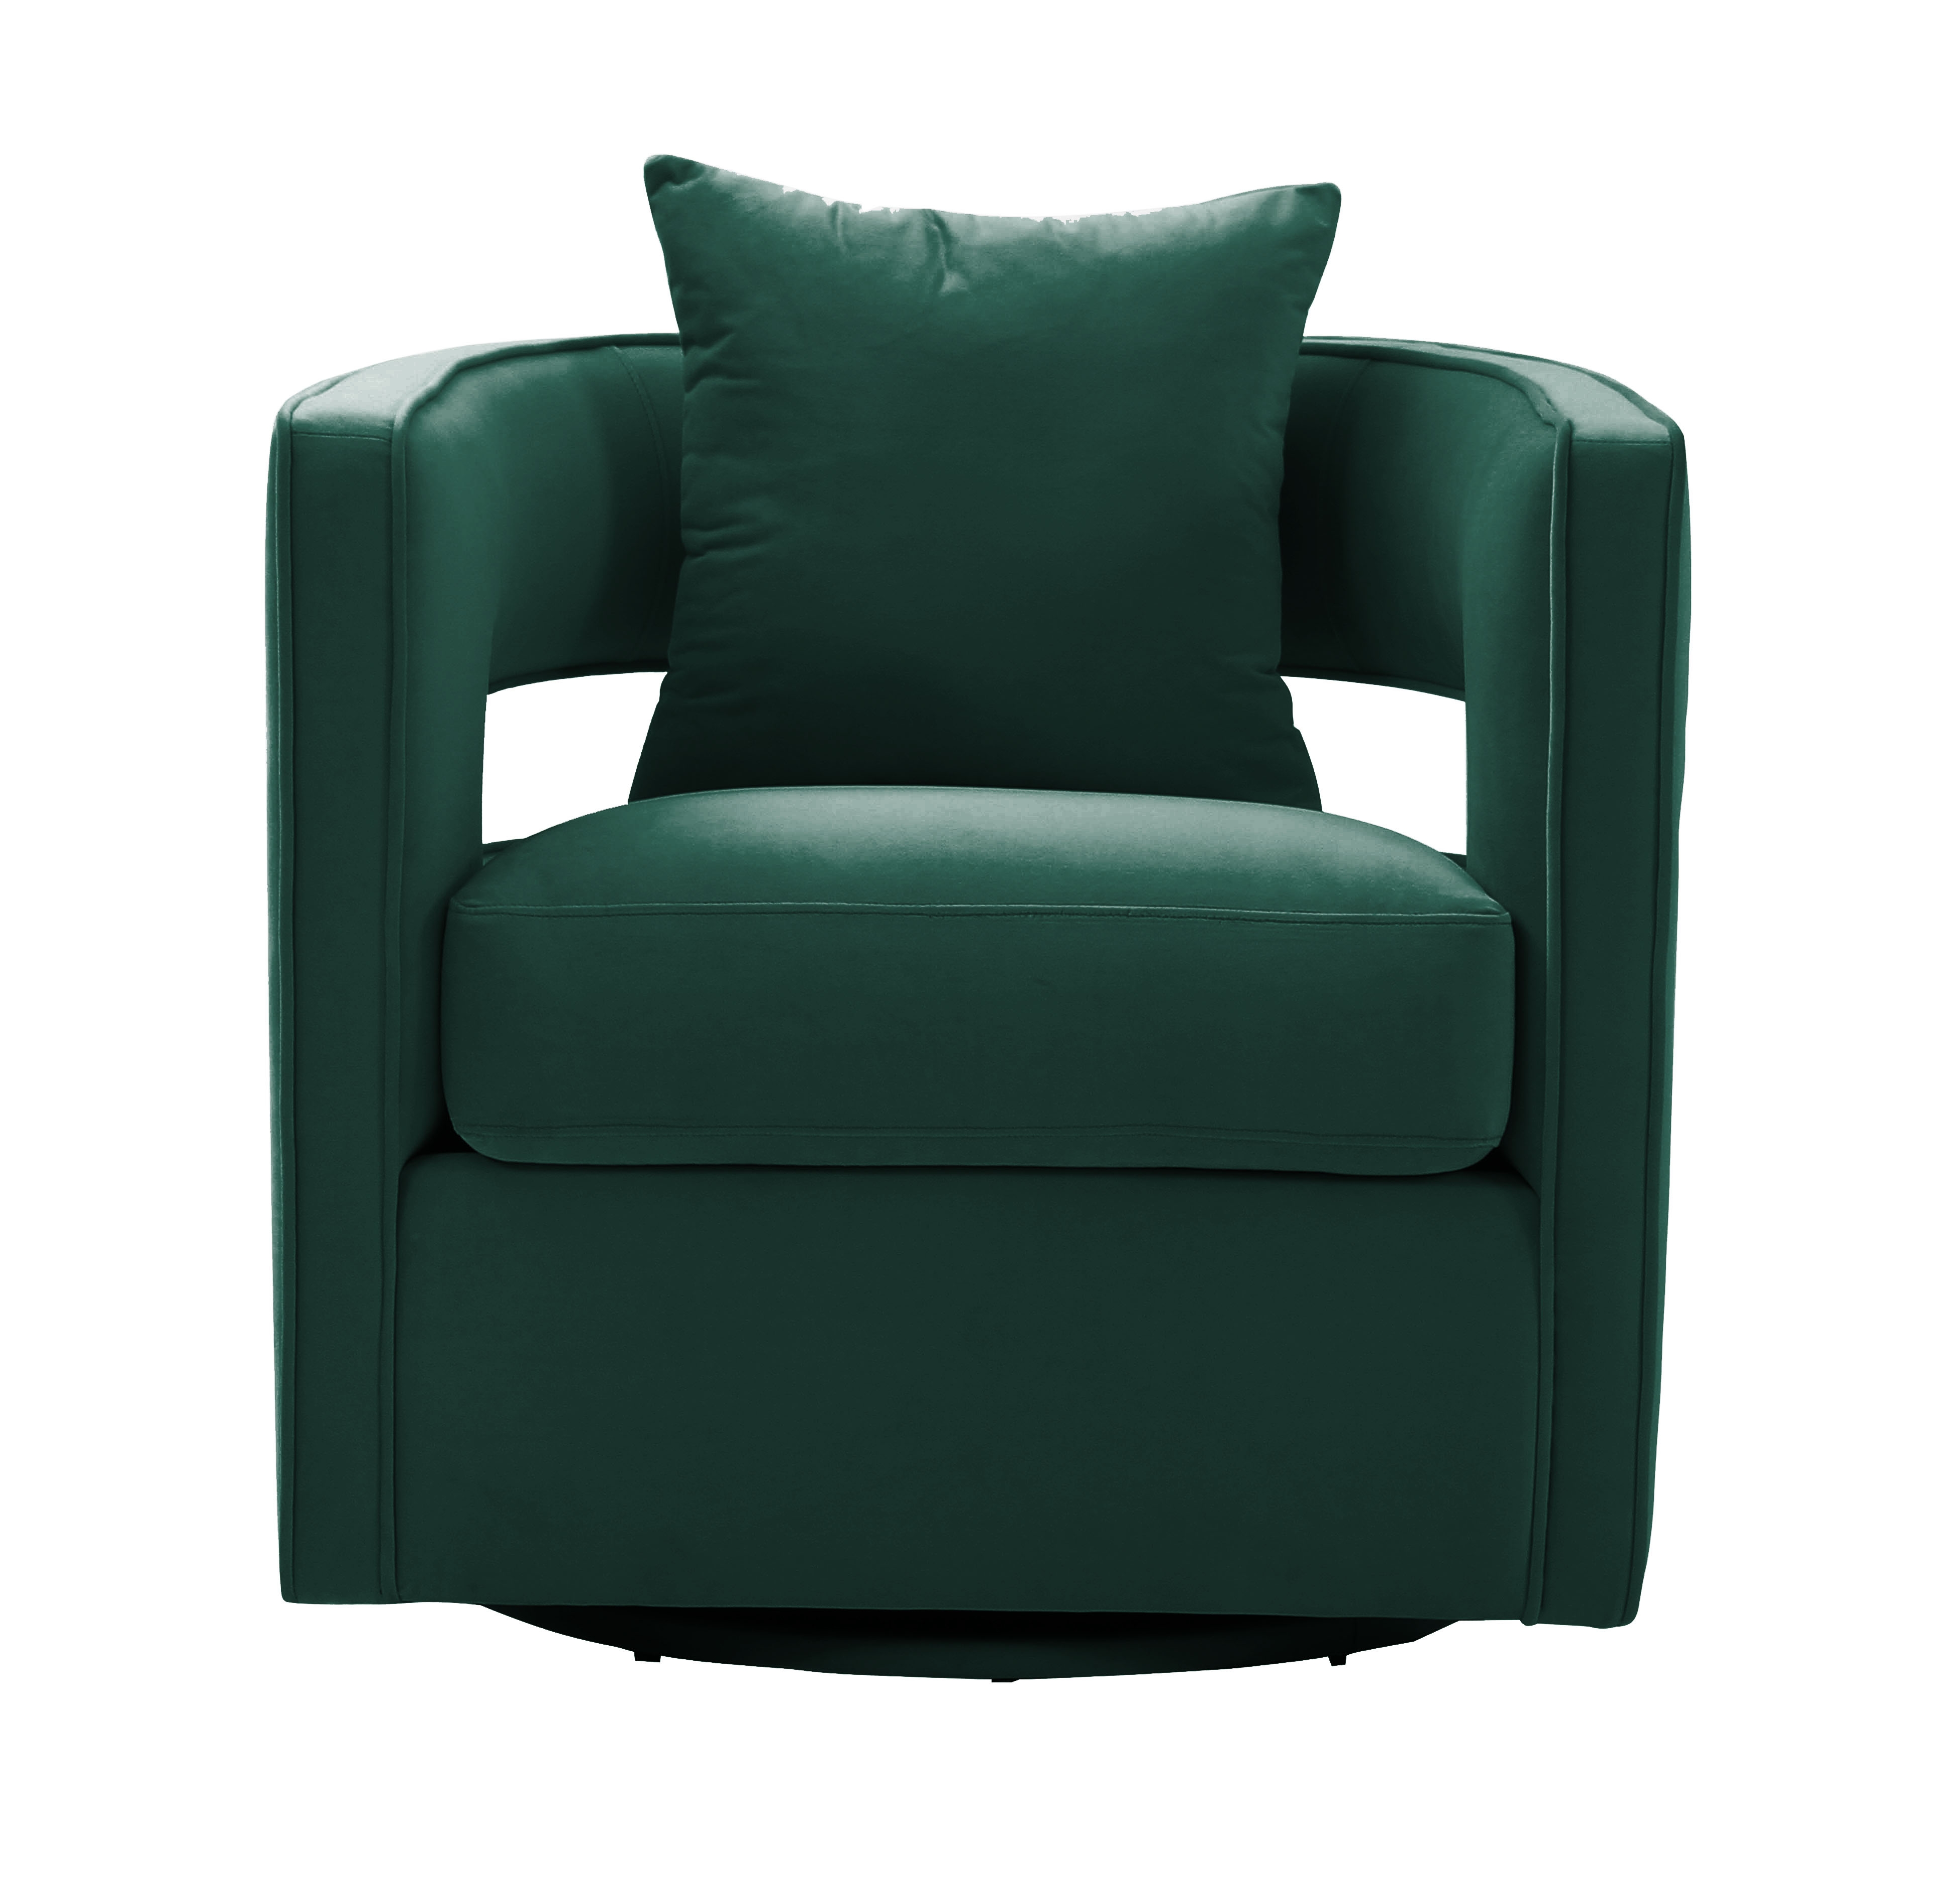 Kennedy Forest Green Swivel Chair - Image 1